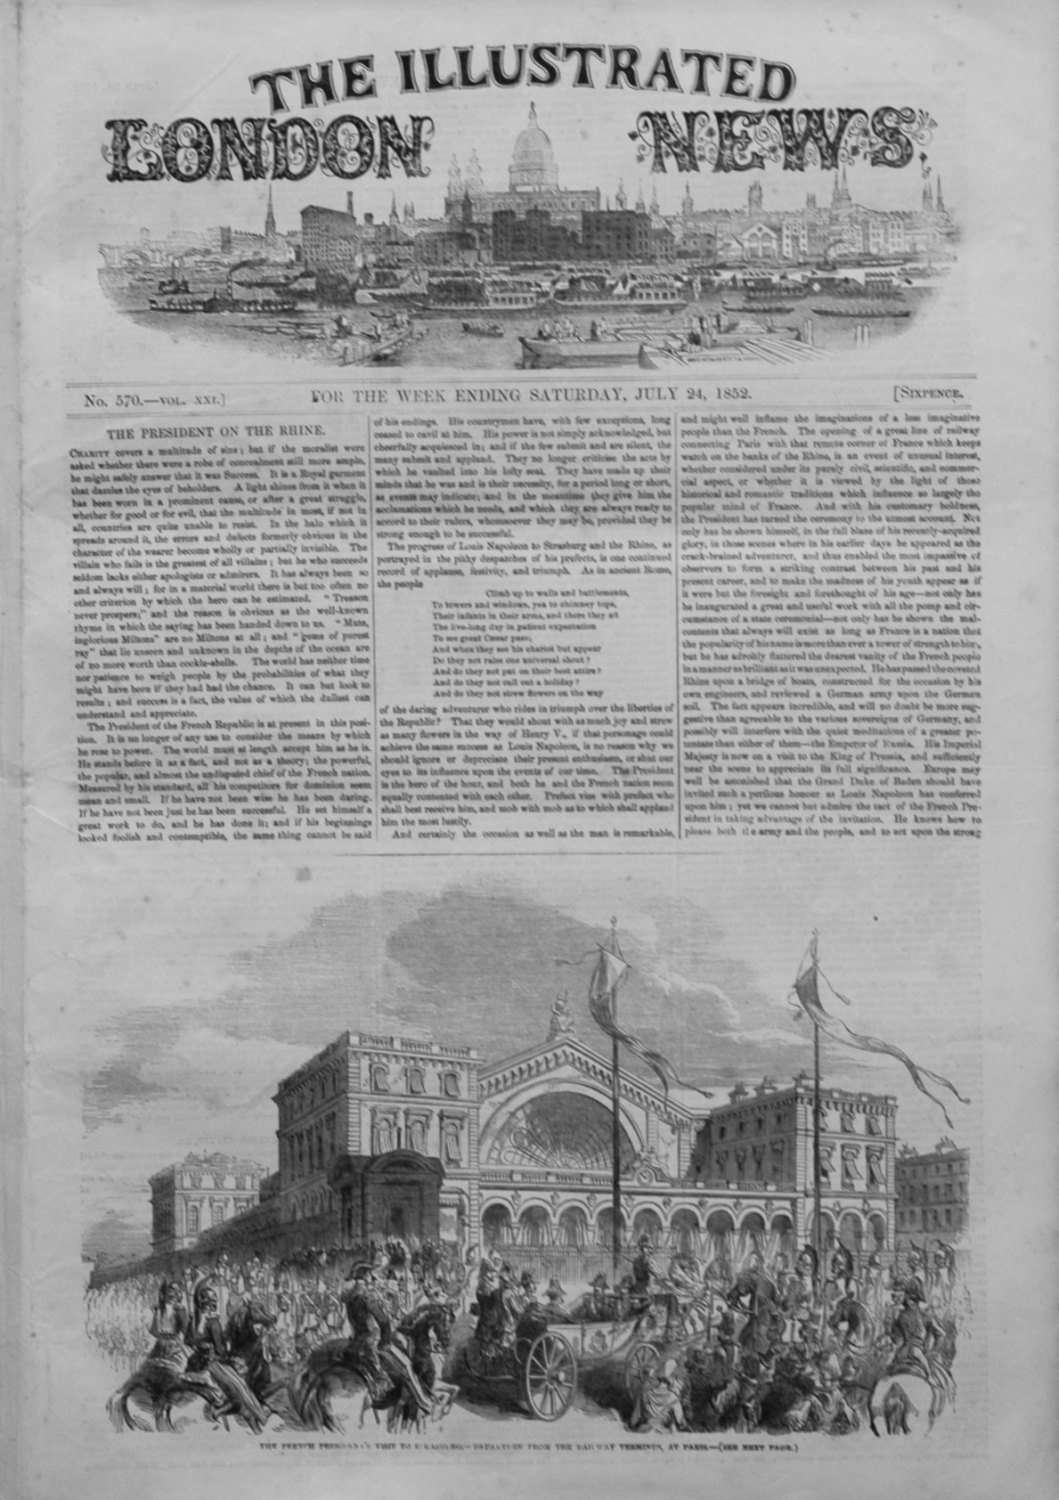 Illustrated London News July 24th 1852.